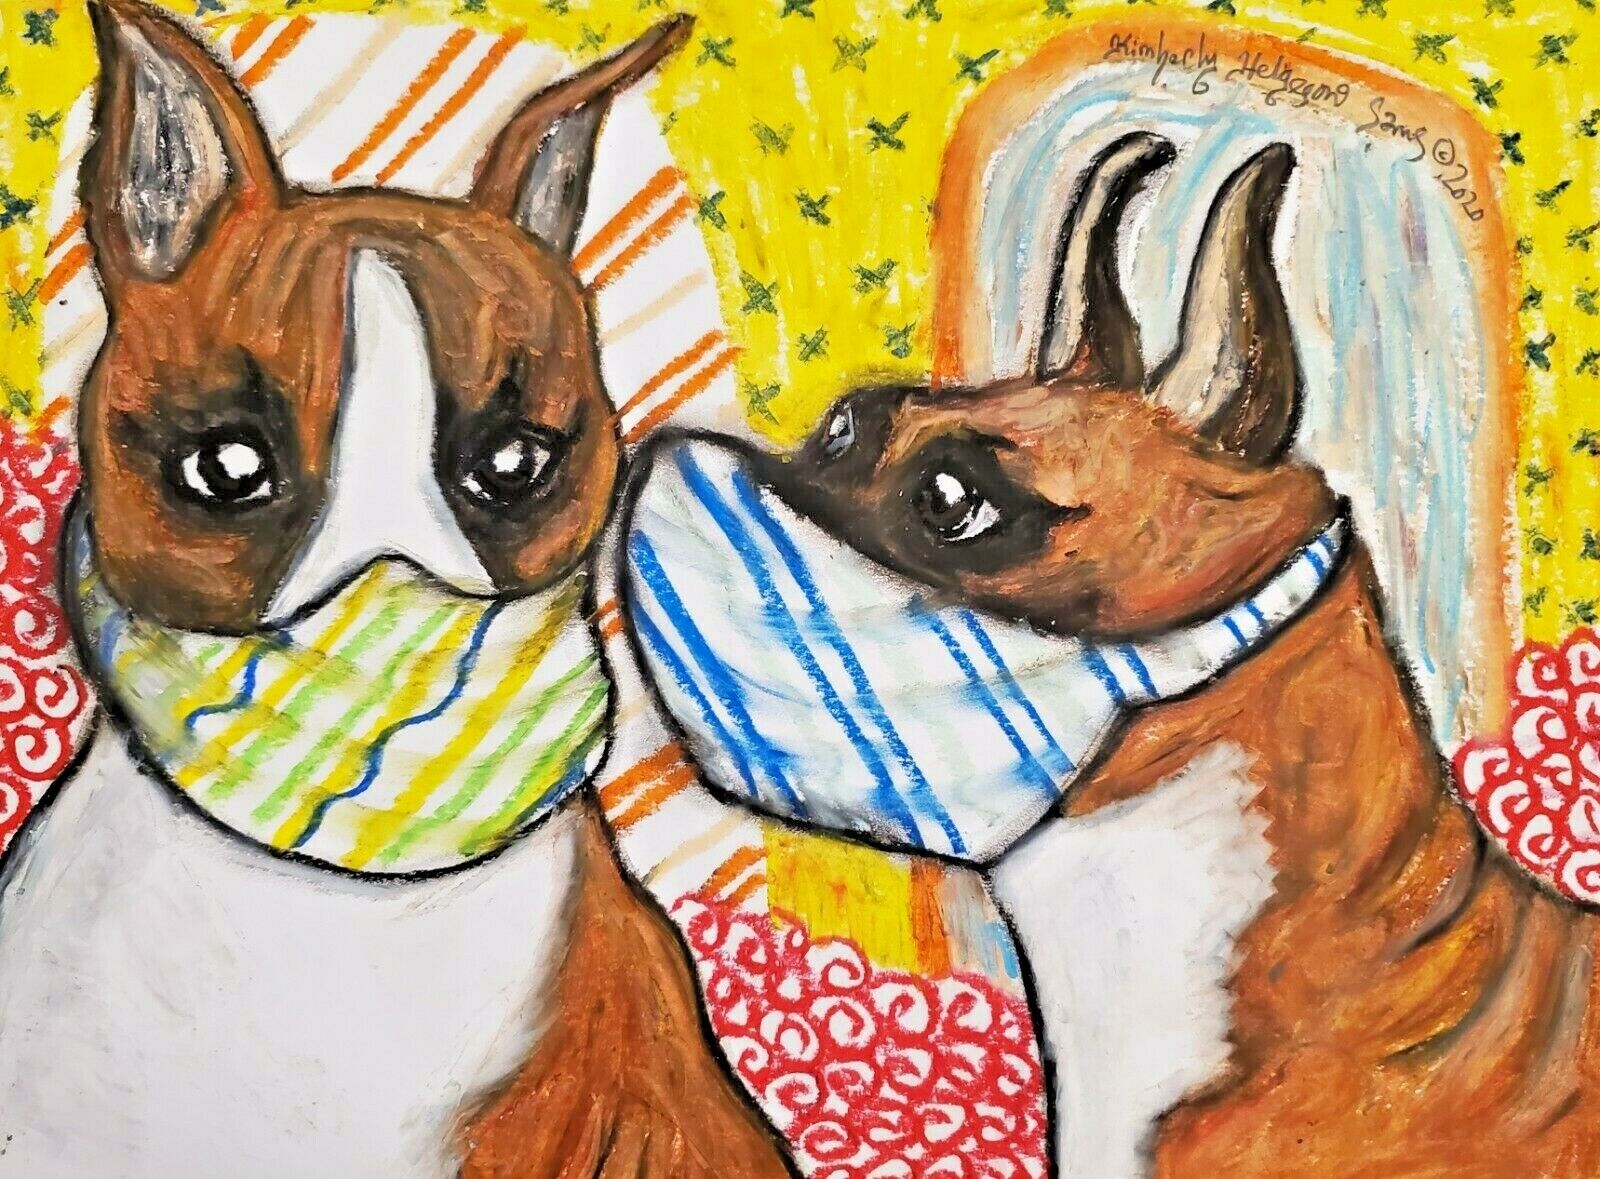 BOXER in Quarantine Art Print 11x14 Dog Collectible Signed by KSams Steampunk